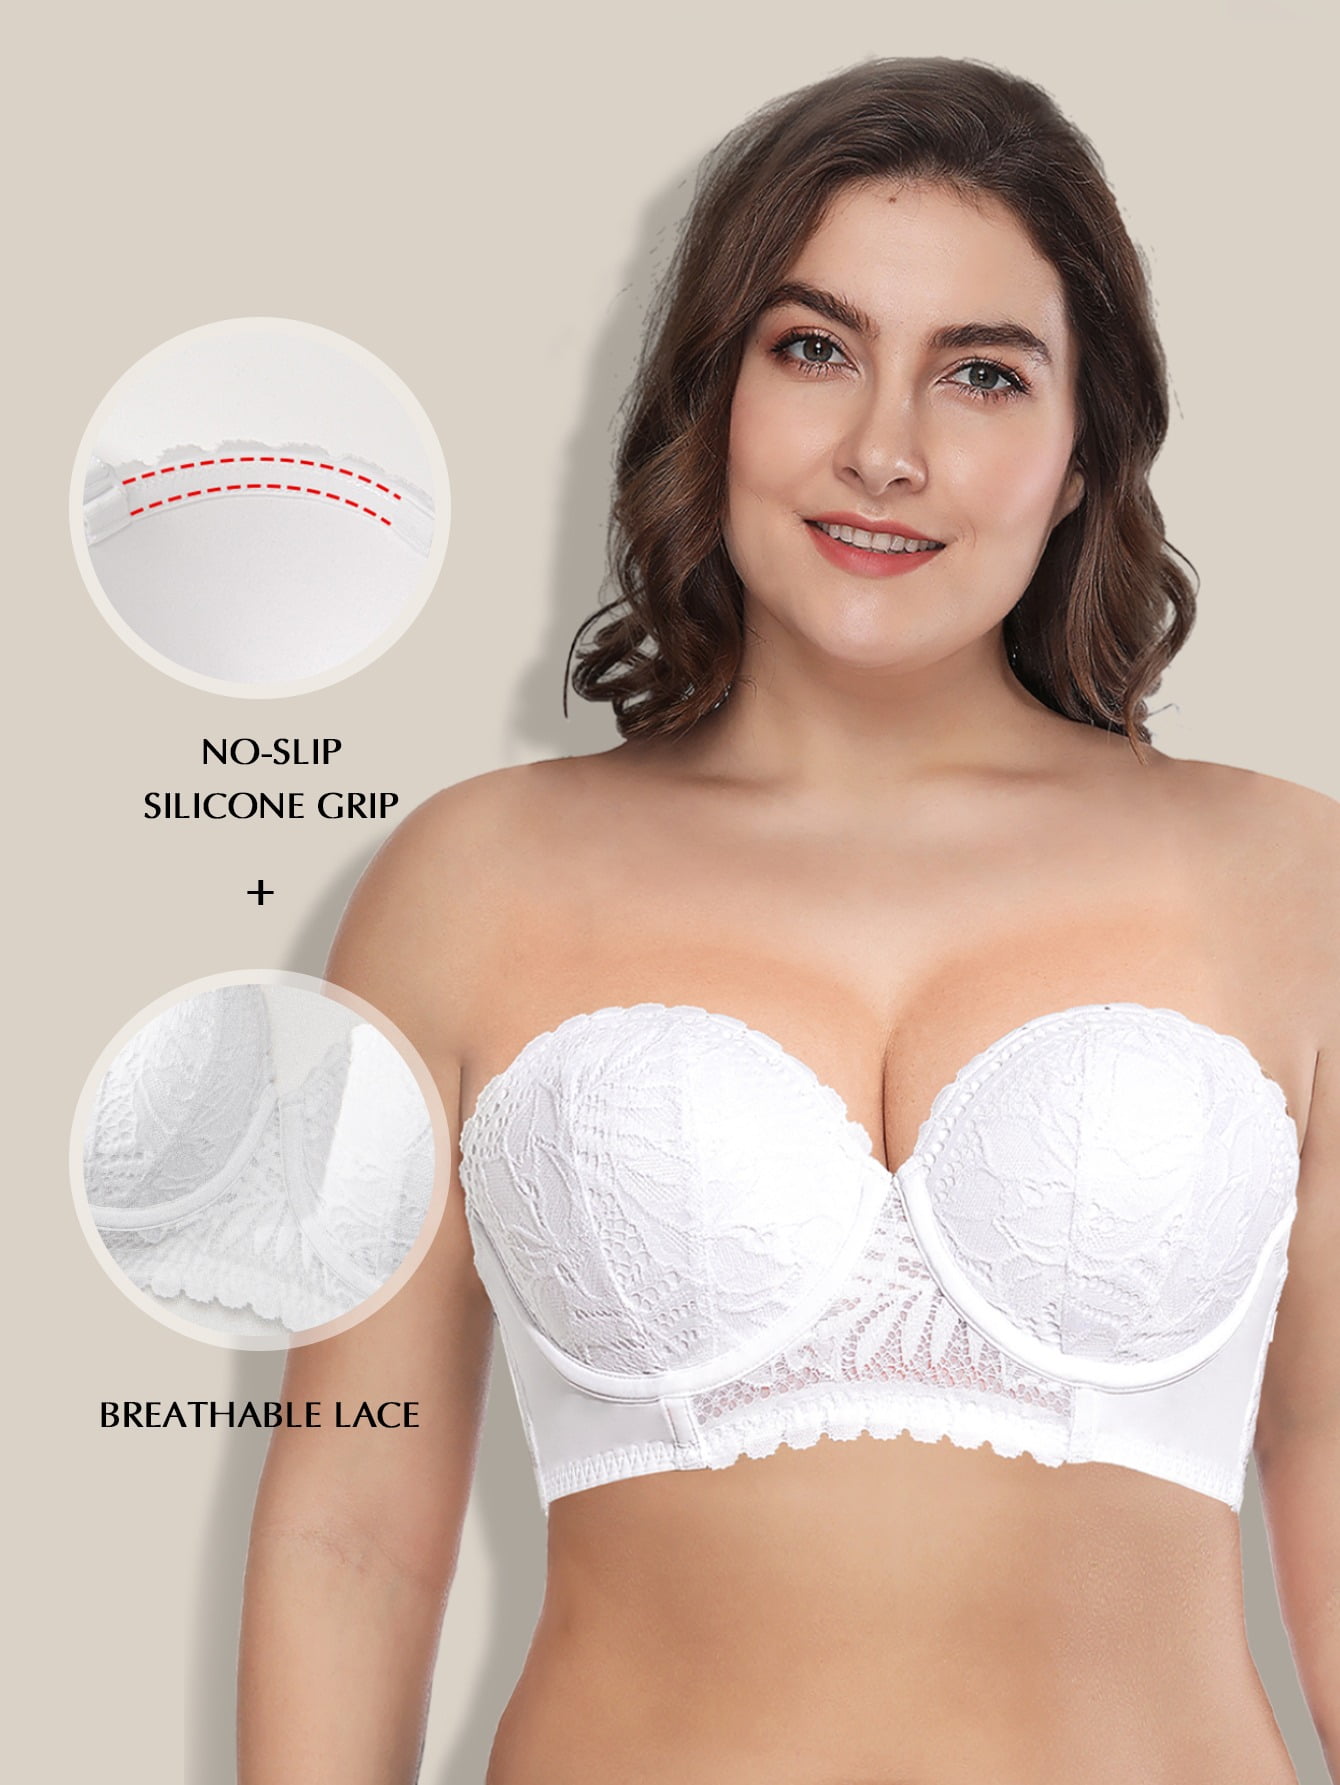 Deyllo Women's Strapless Push Up Full Cup Plus Size Underwire Padded Bra,  White 42D 